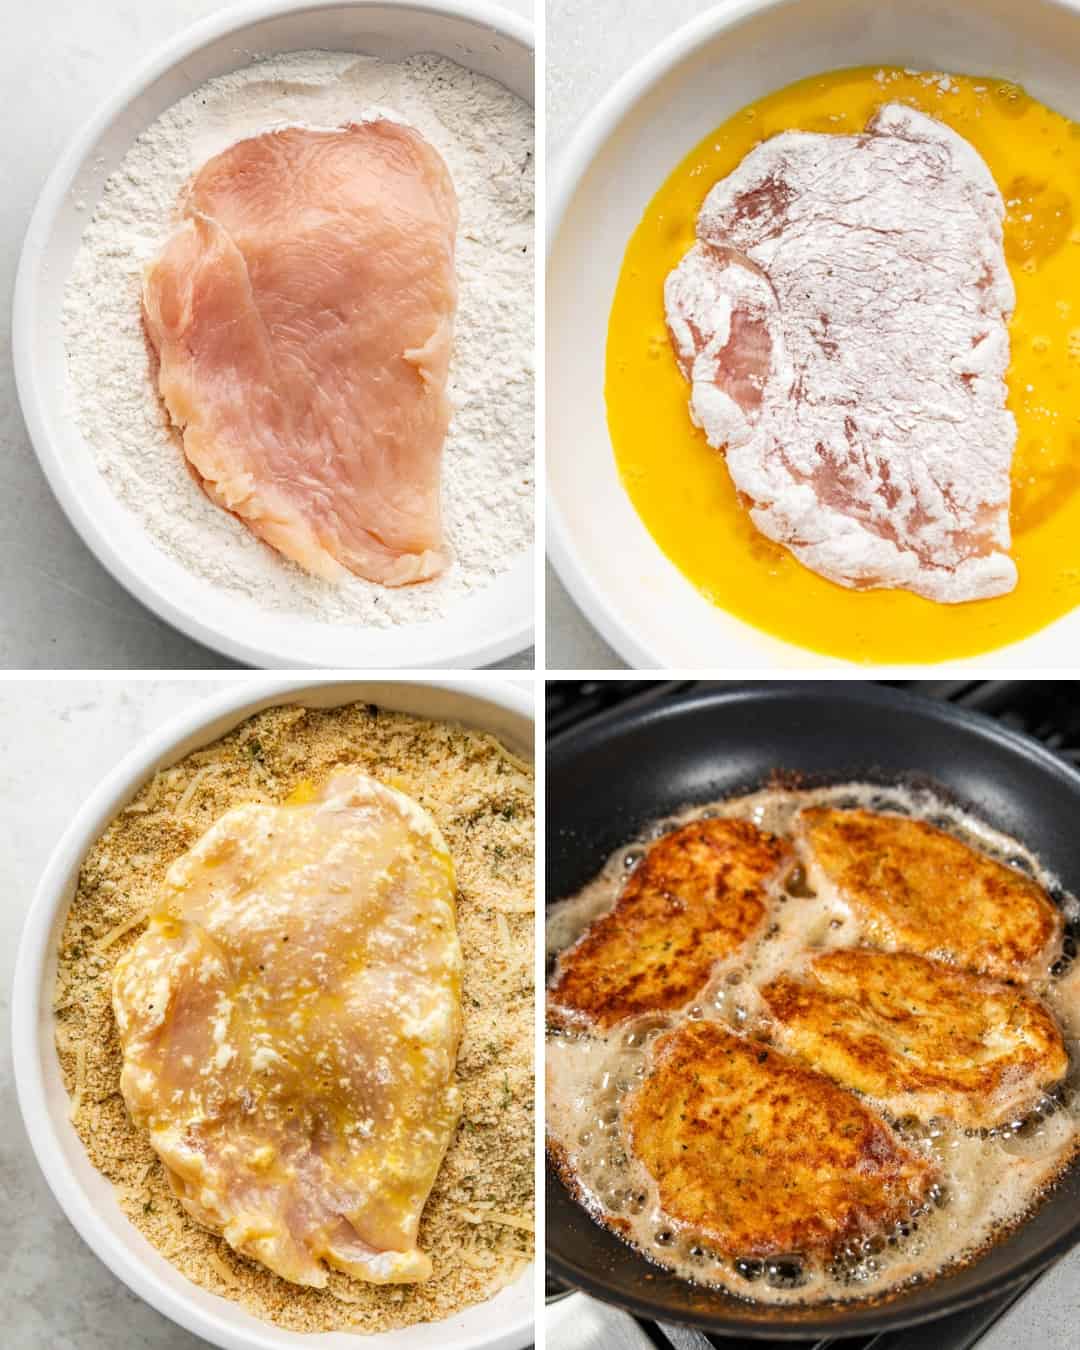 A collage image showing four different steps in the process of breading chicken and preparing it for assembly in making chicken parmesan.